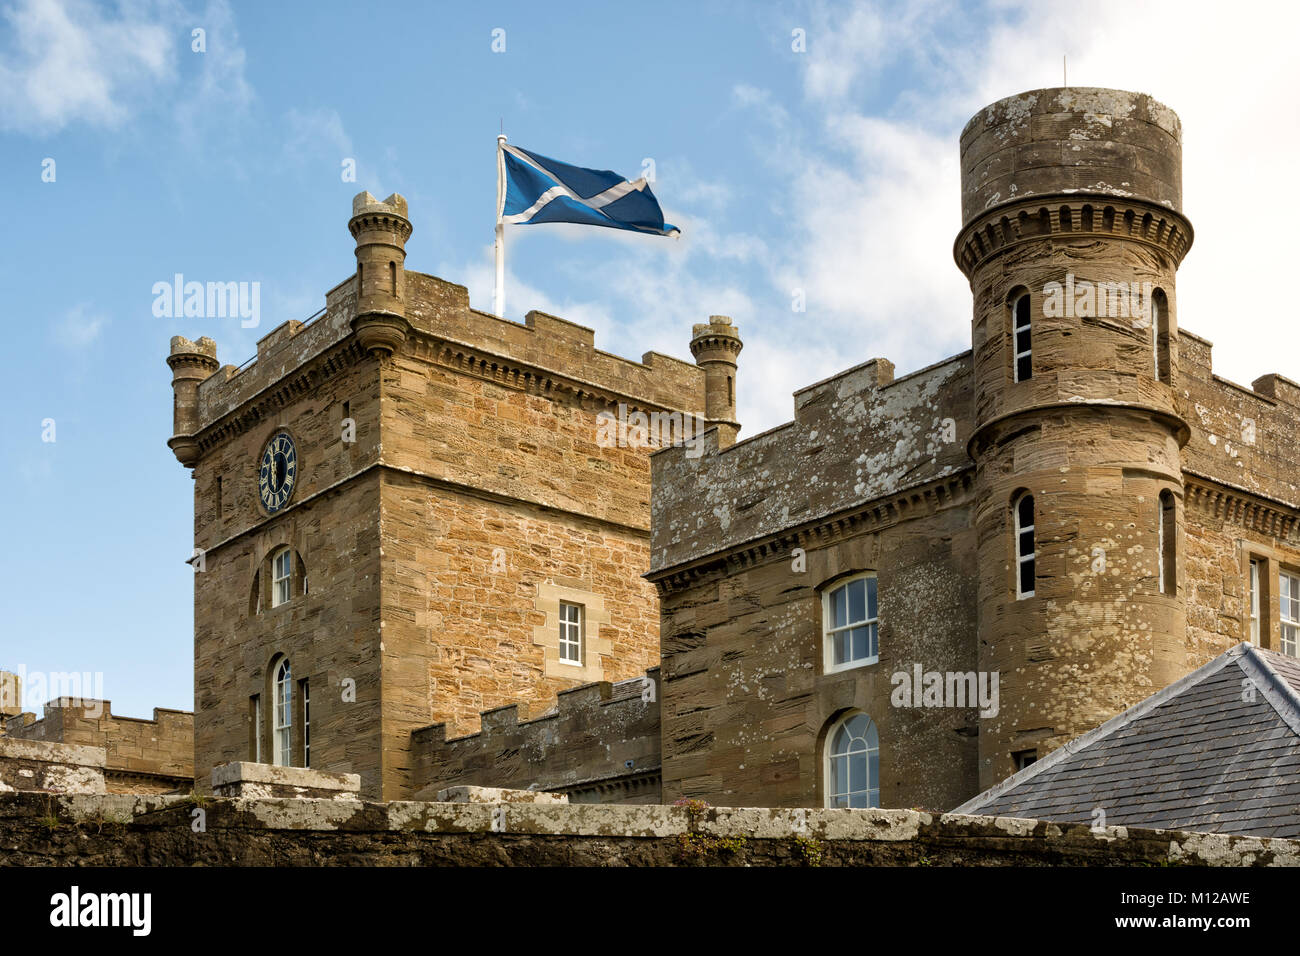 Towers of Calzean castle with Scottish flag waving in the breeze, Scotland, UK Stock Photo